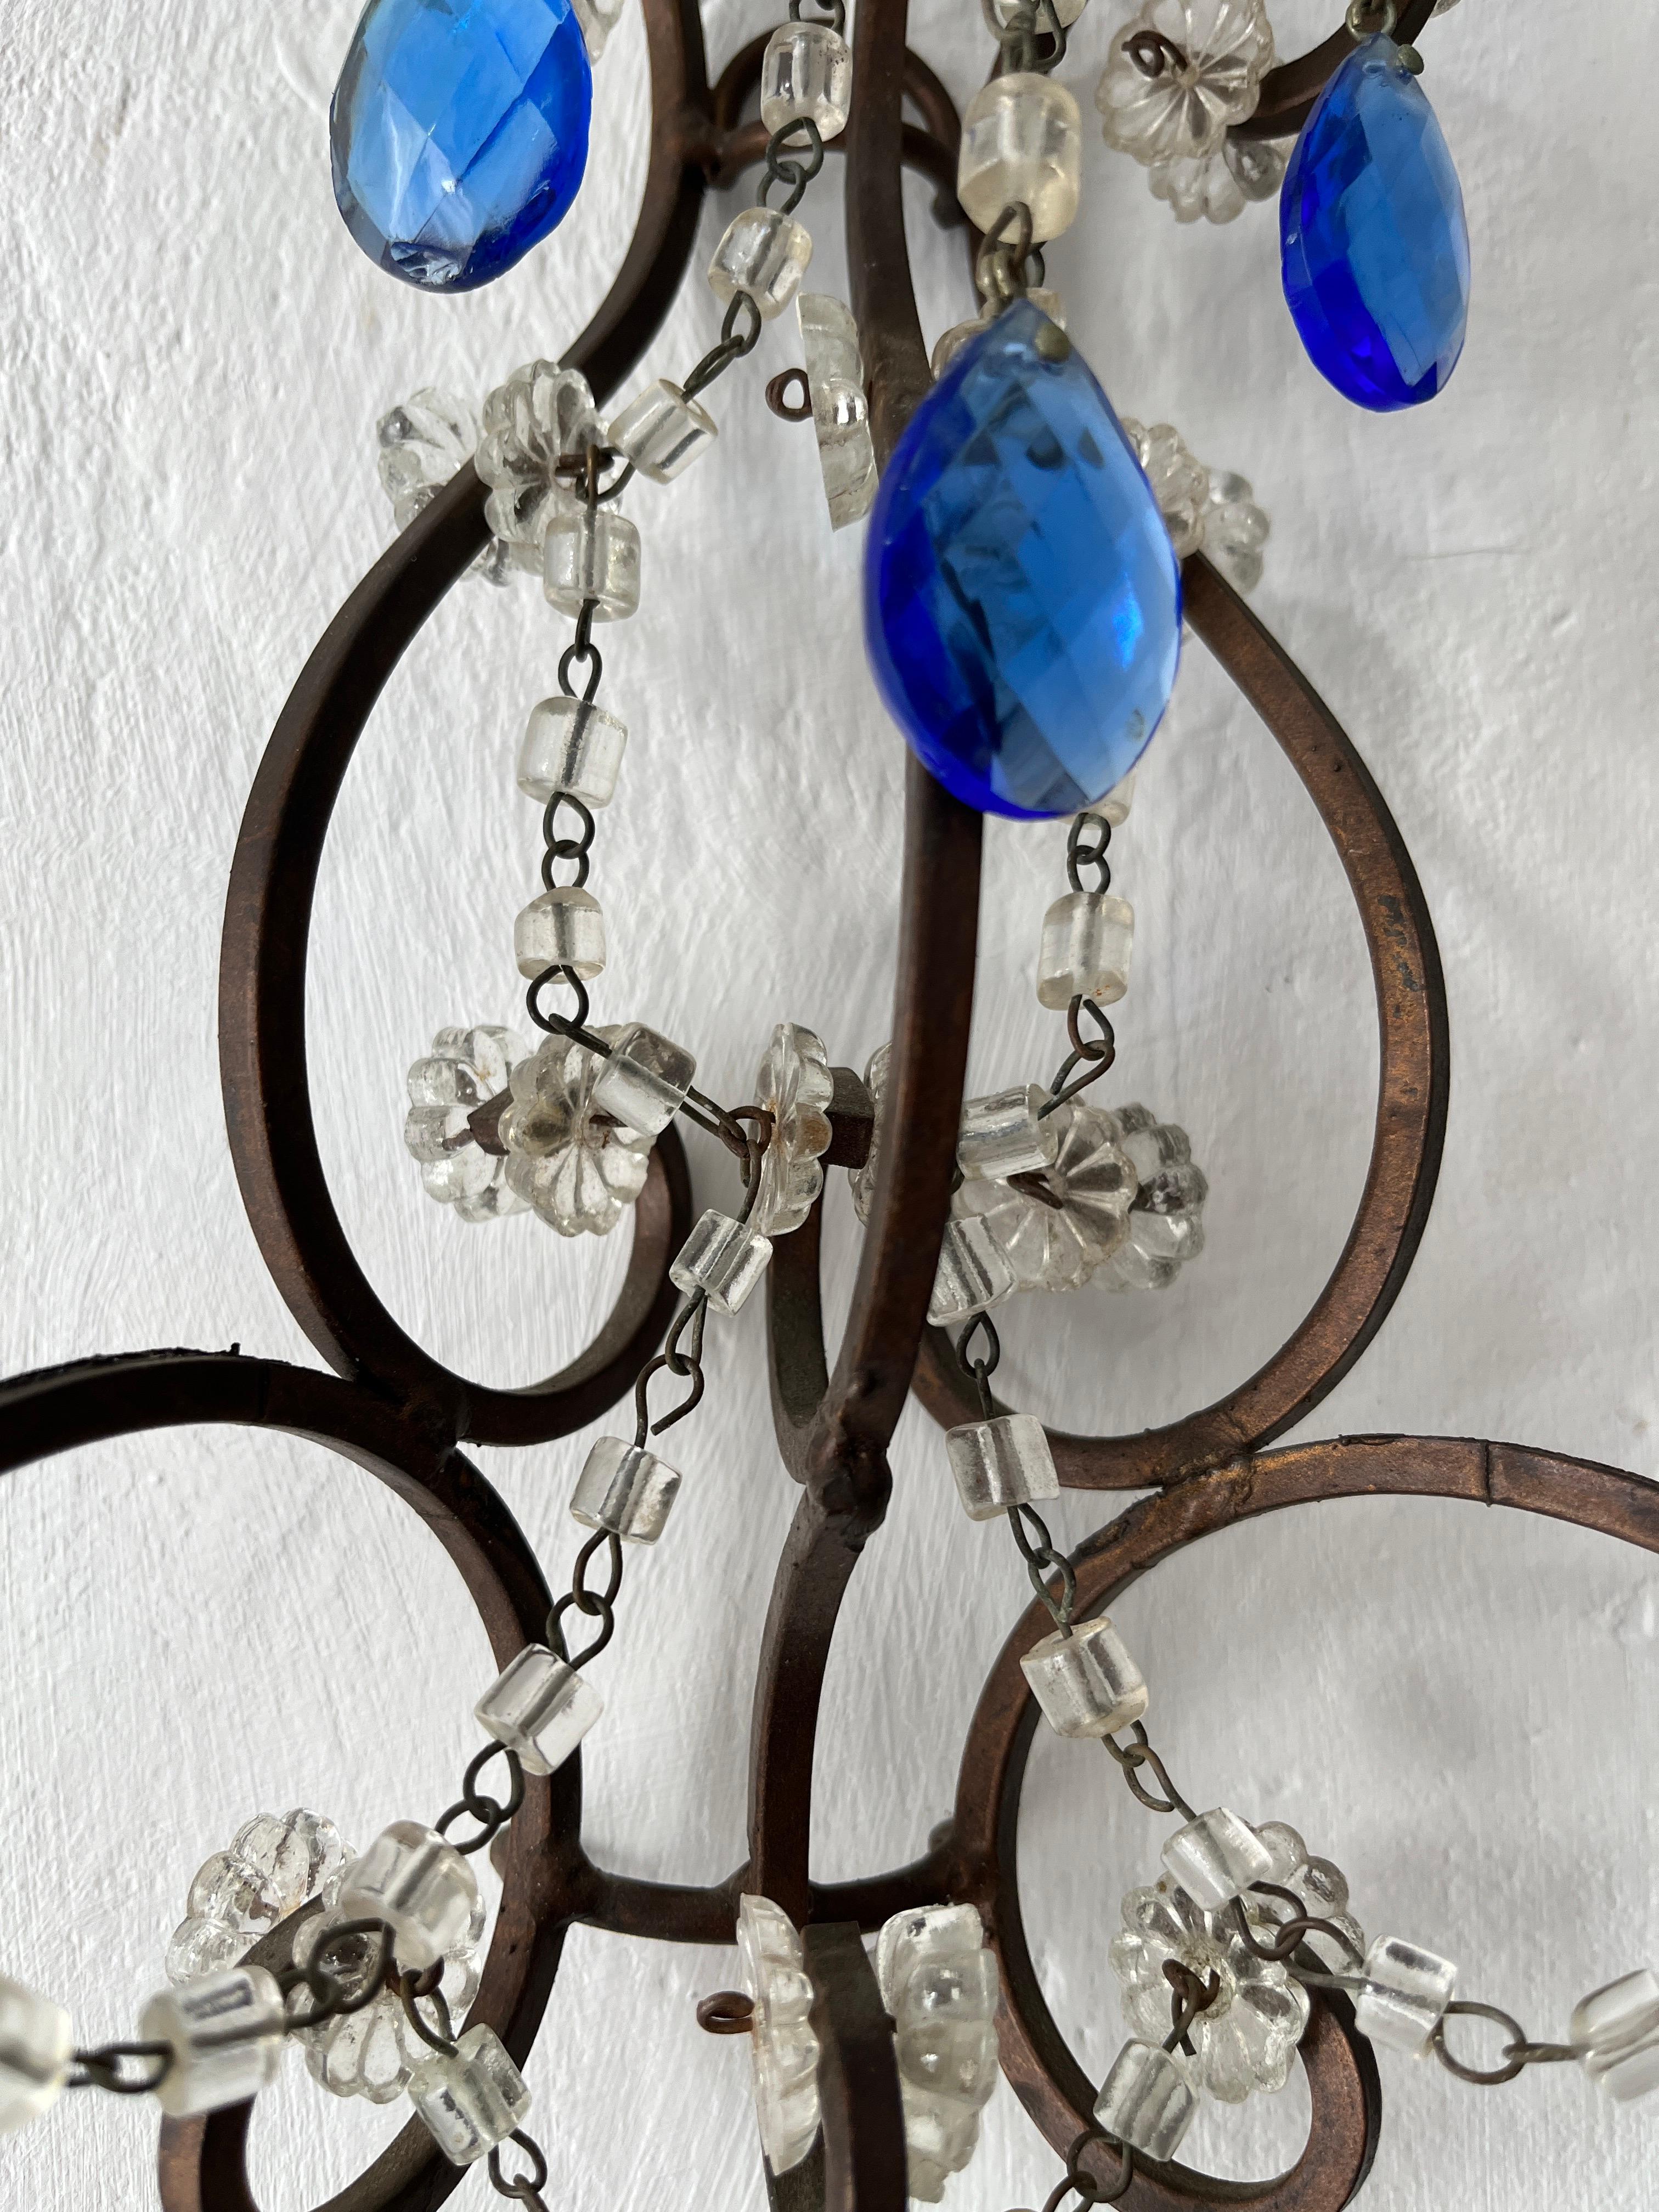 Beautiful French Cobalt Blue Prisms Macaroni Bead Swags Sconces c1920 For Sale 4